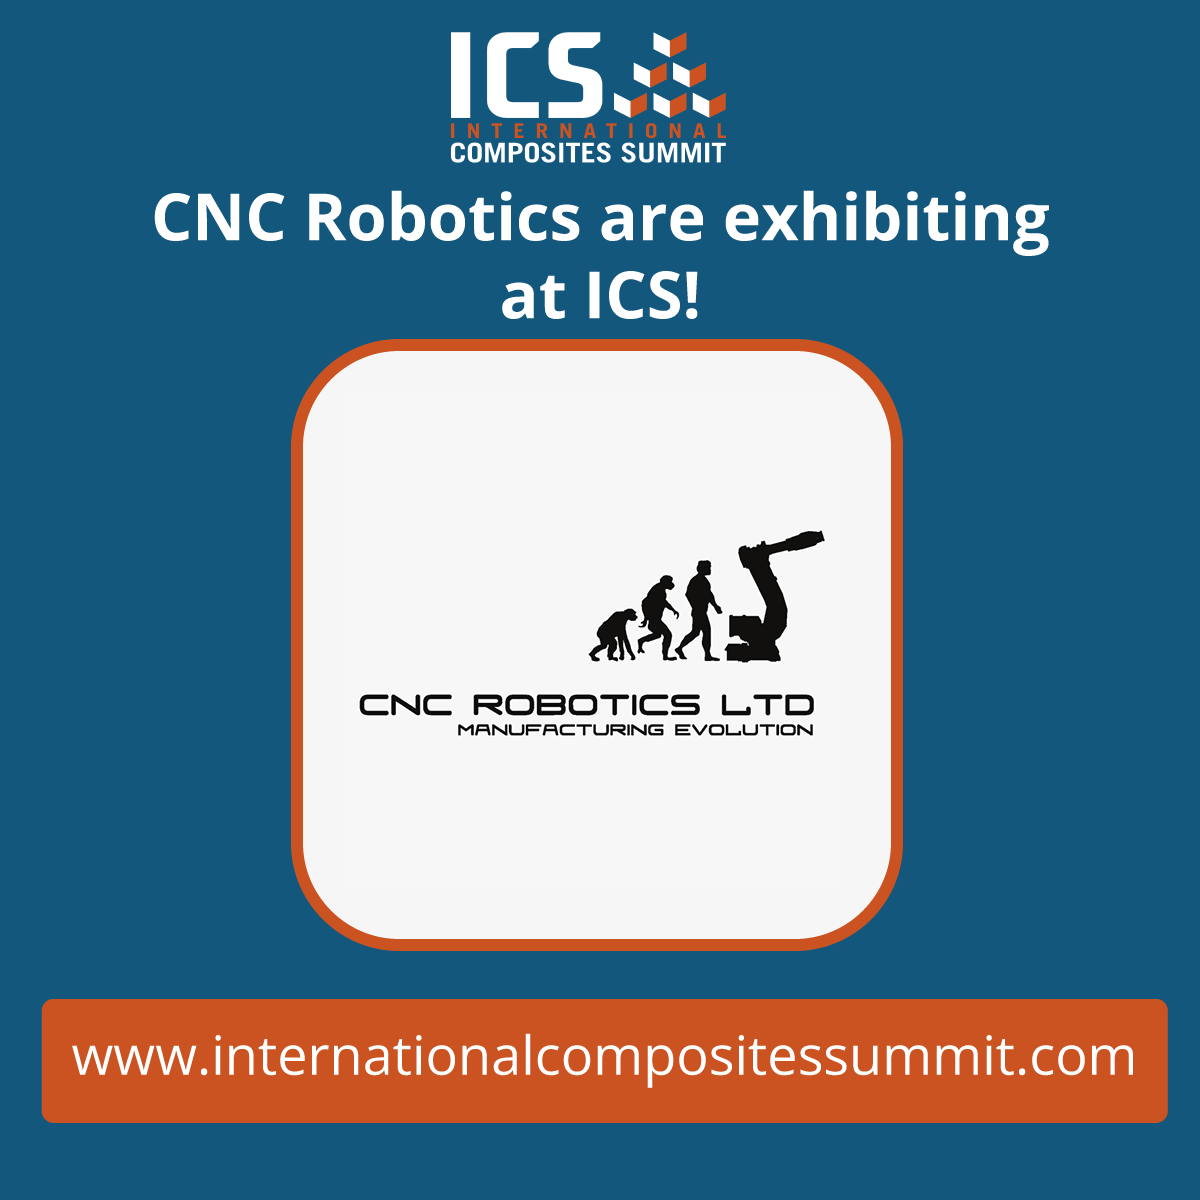 Join us at this year's International Composites Summit 2022! This FREE-to-attend event is spread over two days. ICS offers unrivaled insight into current and future composite developments, with experts from across the industry in attendance. ow.ly/s2IB50K5ty2 #UKmfg